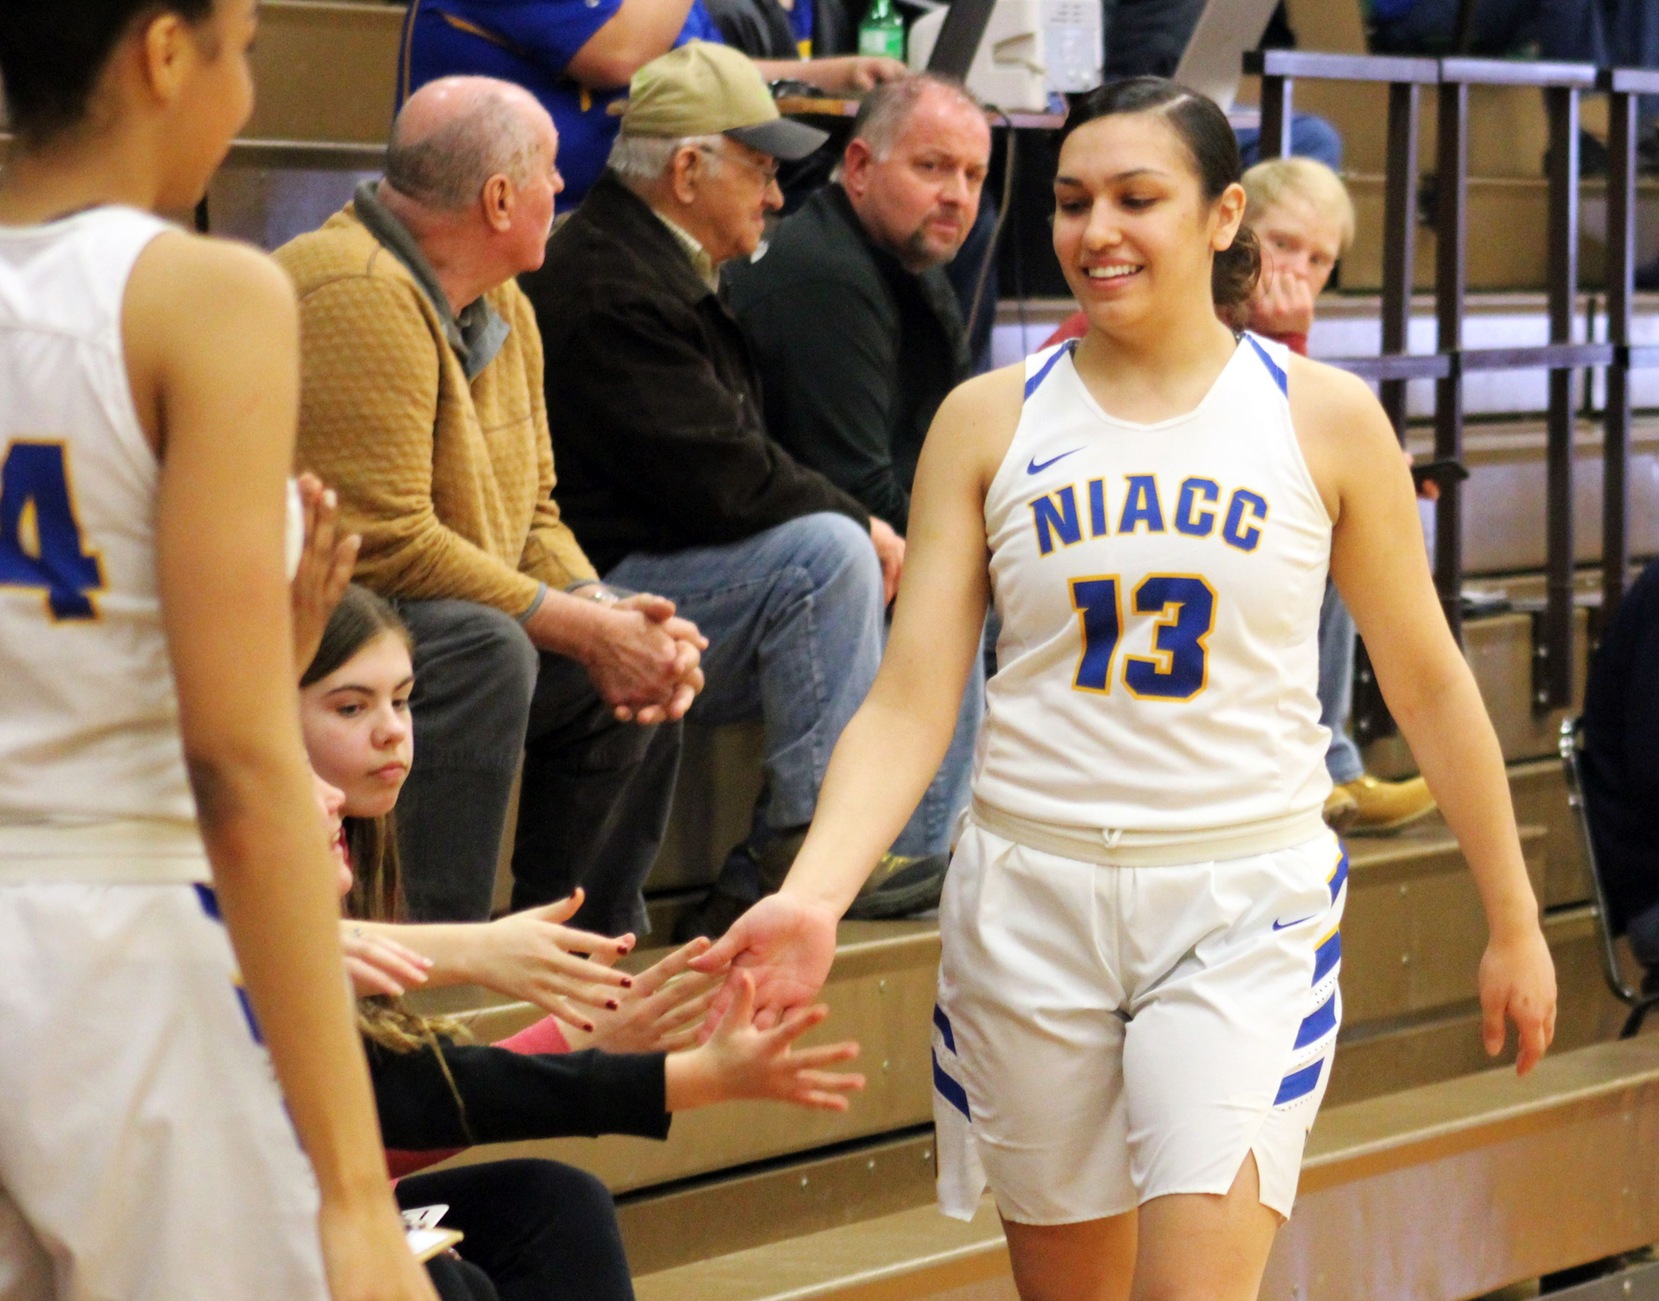 NIACC's Autam Mendez was selected as the NJCAA Division II national player of the week for the week of Feb. 24-March 1.